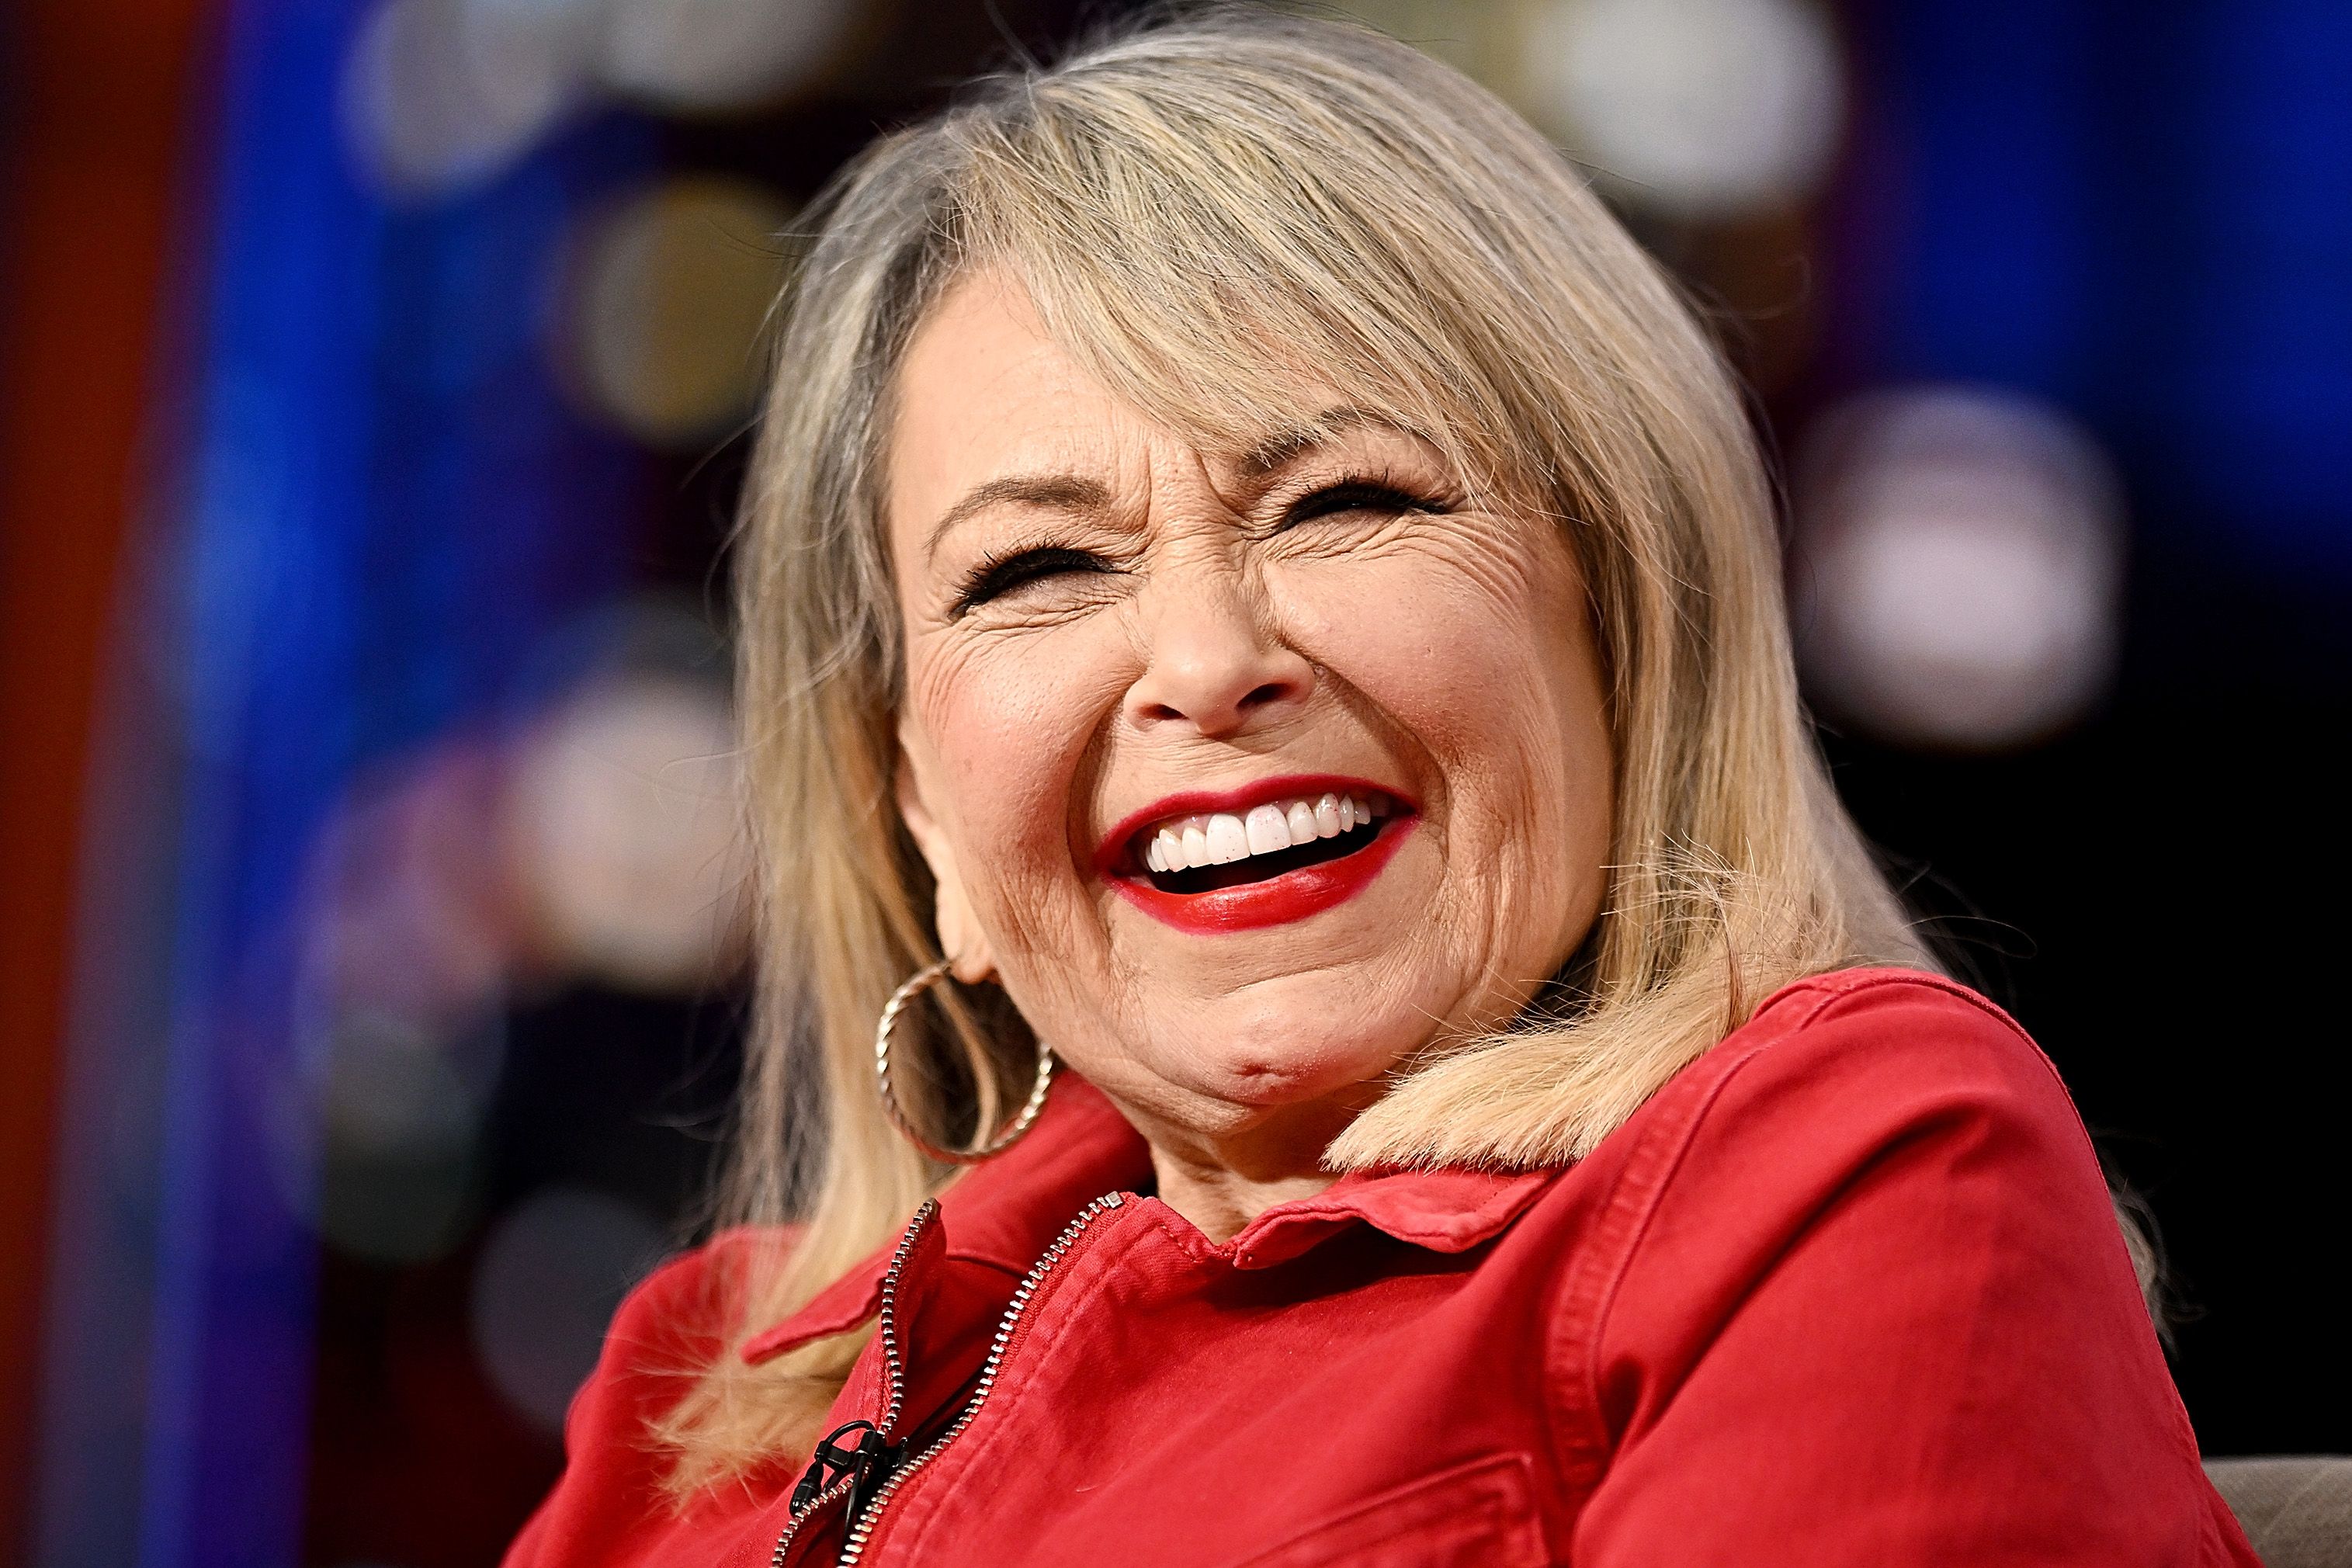 Roseanne Barr visits FOX News Channel’s "Gutfeld!" on February 14, 2023, in New York City. | Source: Getty Images